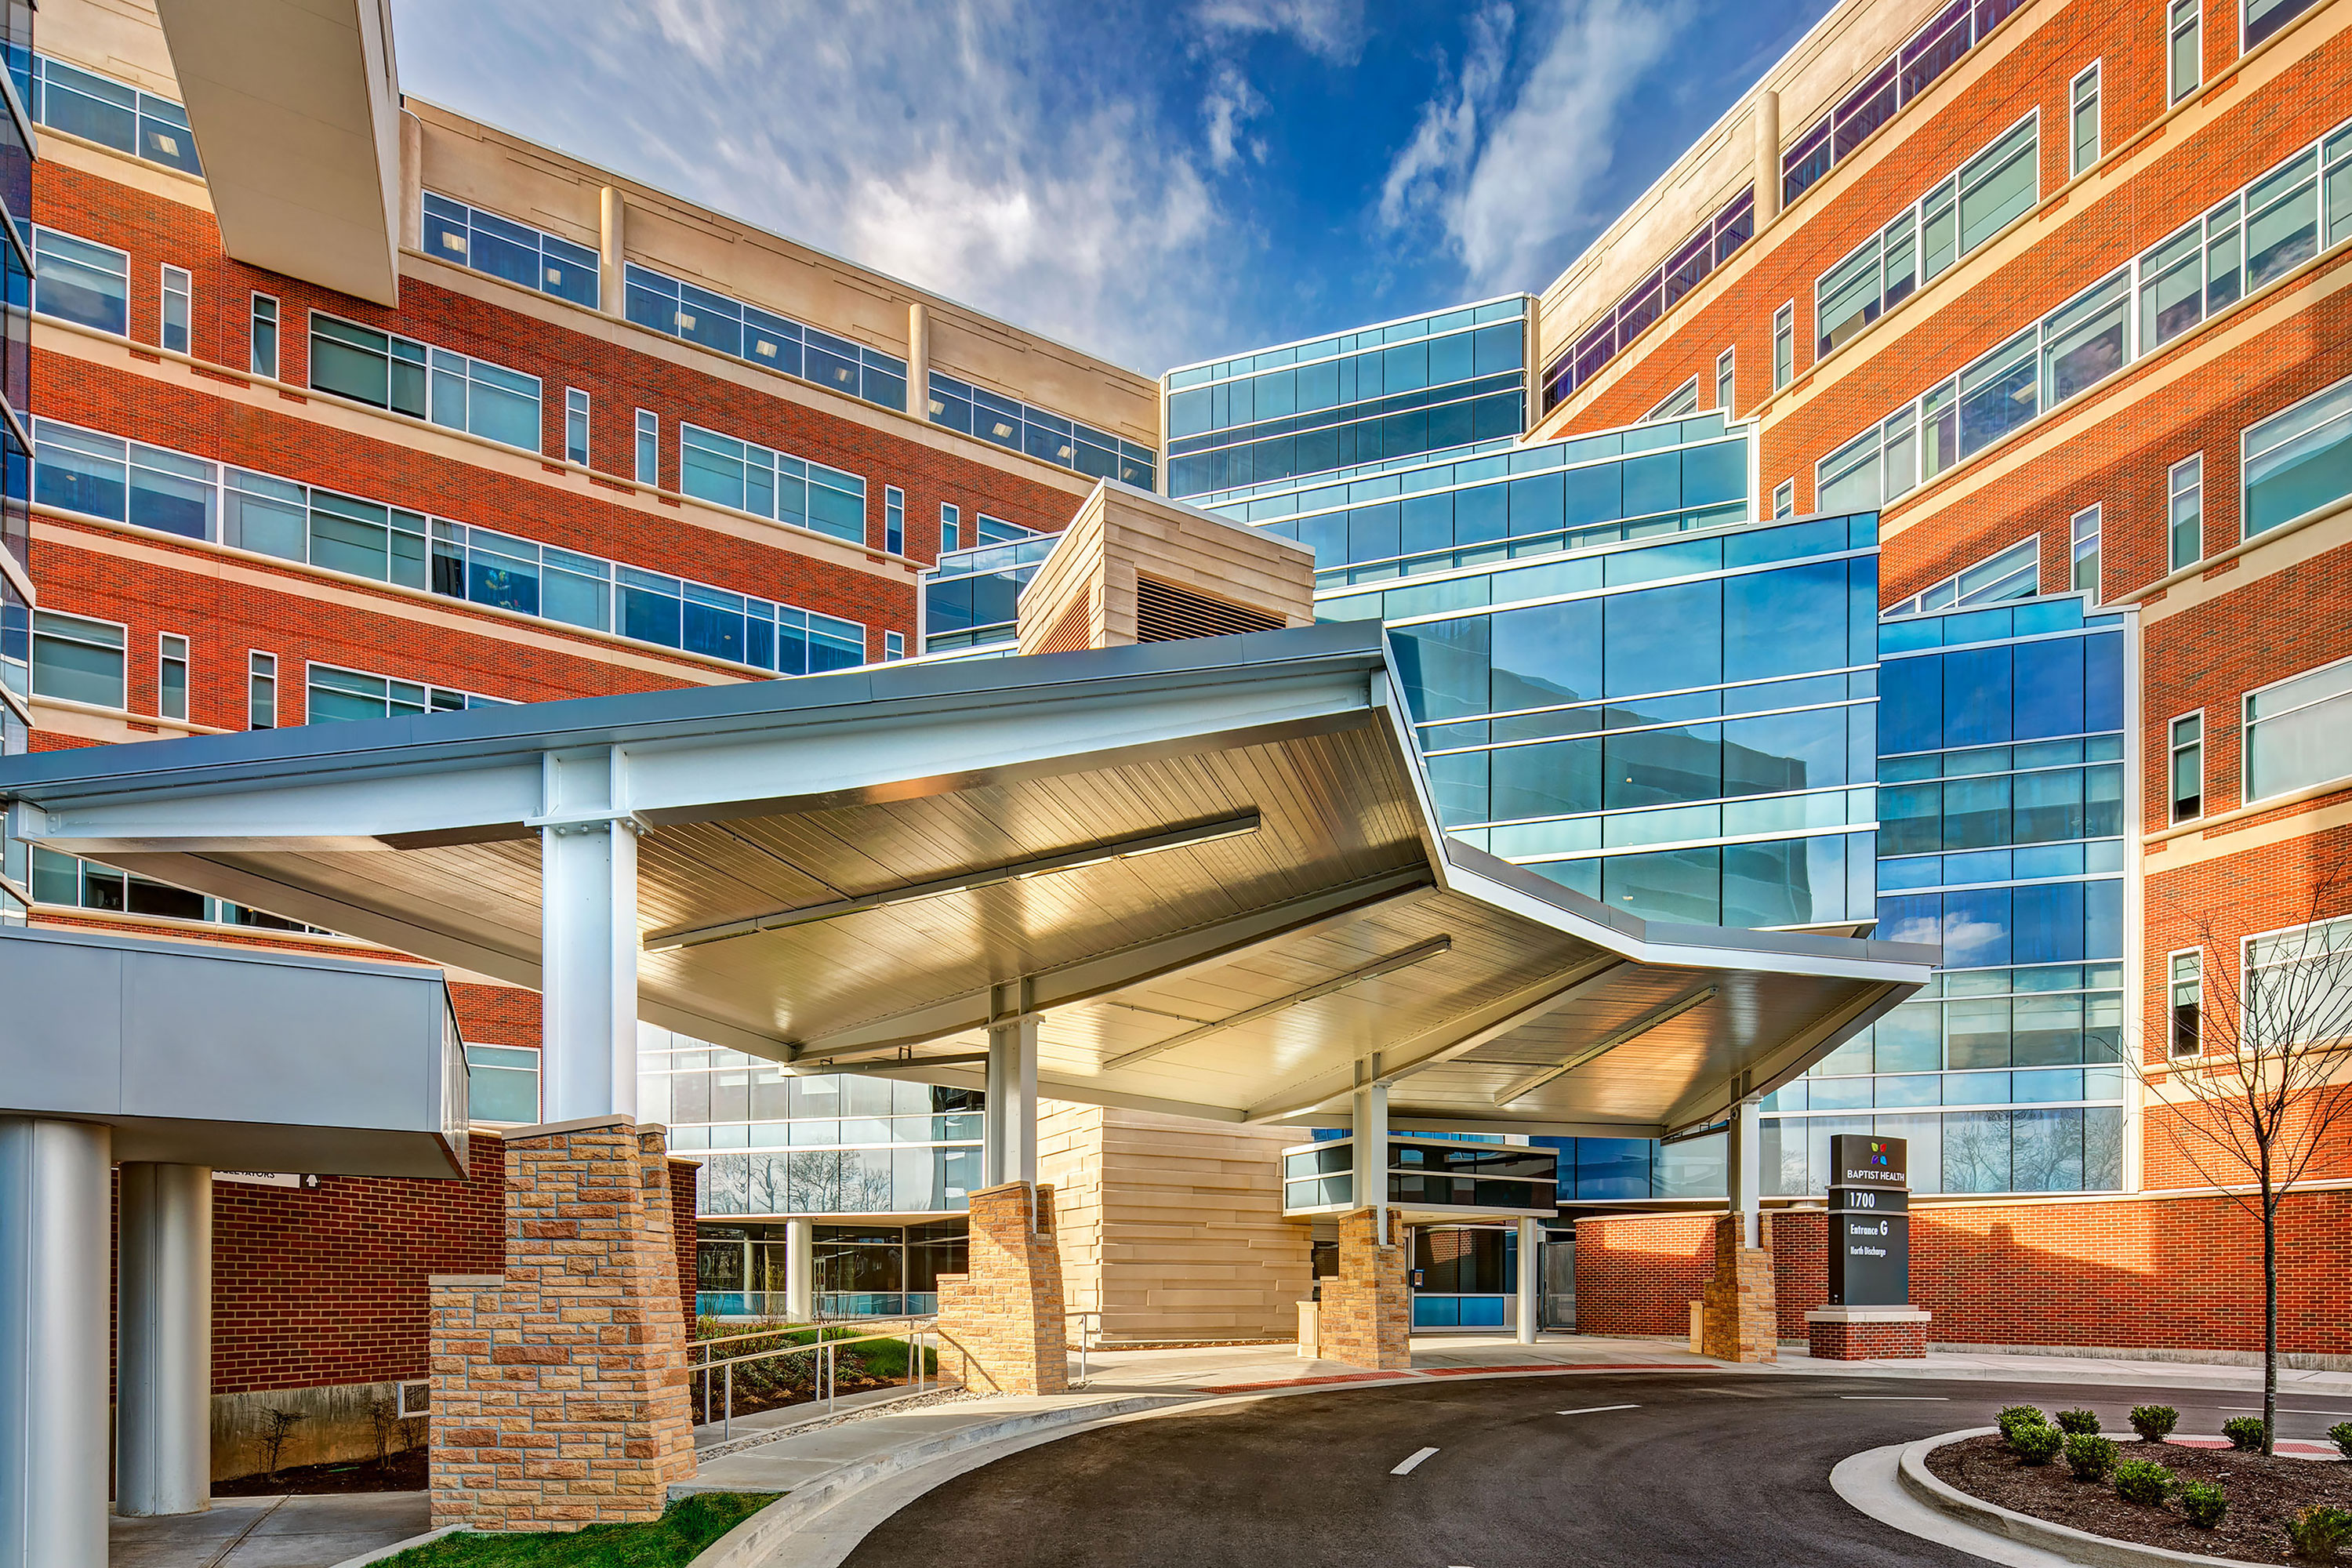 Baptist Hospital - Louisville, Kentucky. Architecture Photography by Alan Blakely. 